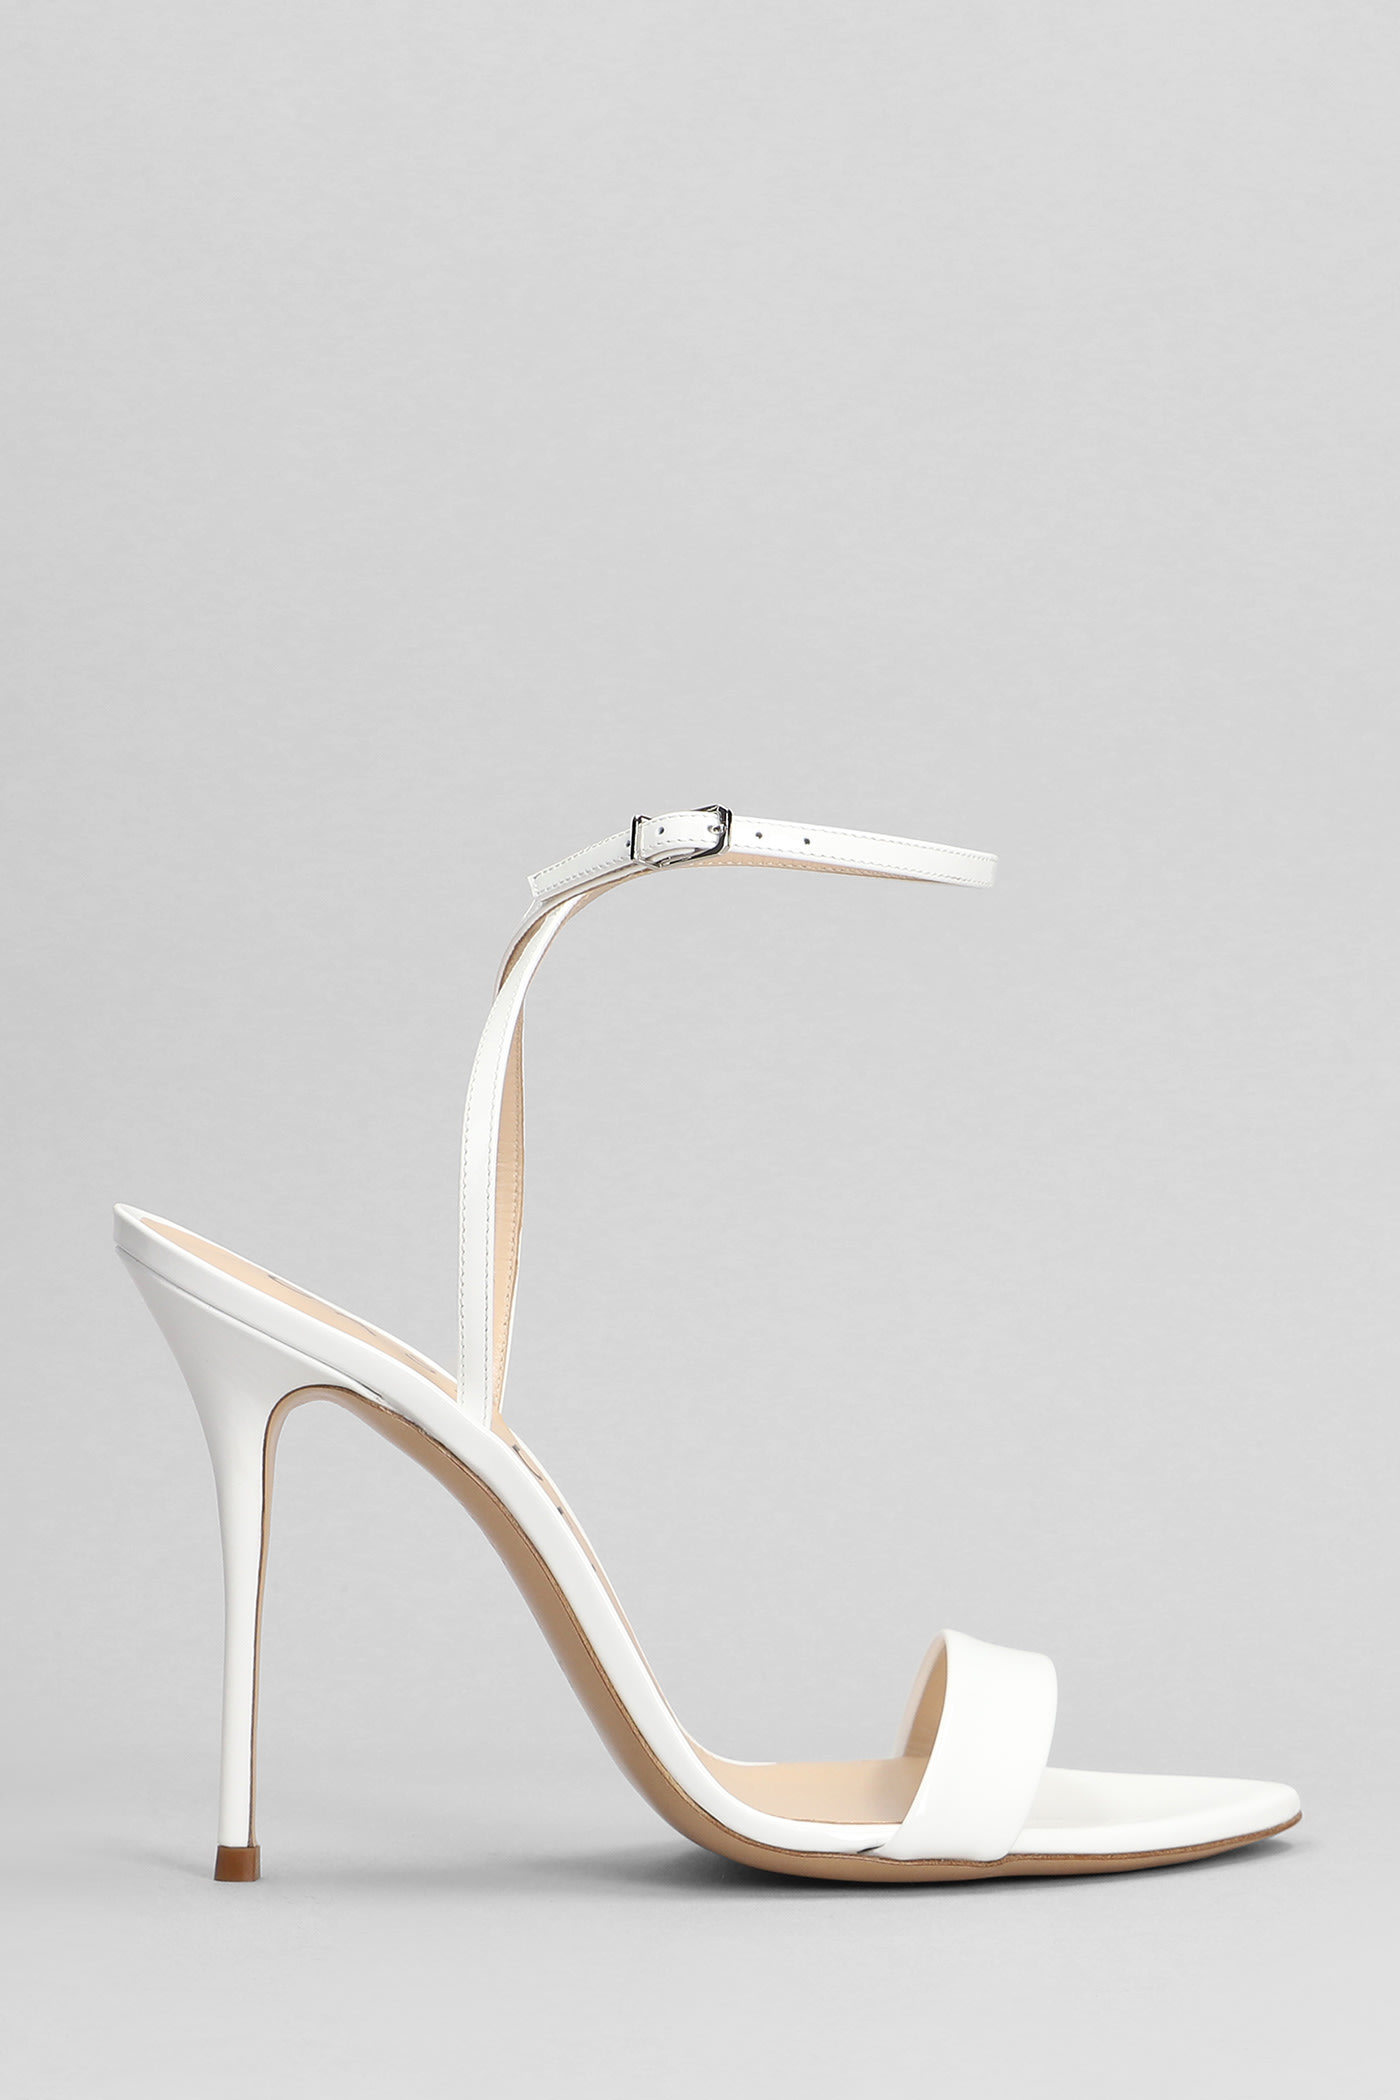 CASADEI SCARLET SANDALS IN WHITE PATENT LEATHER